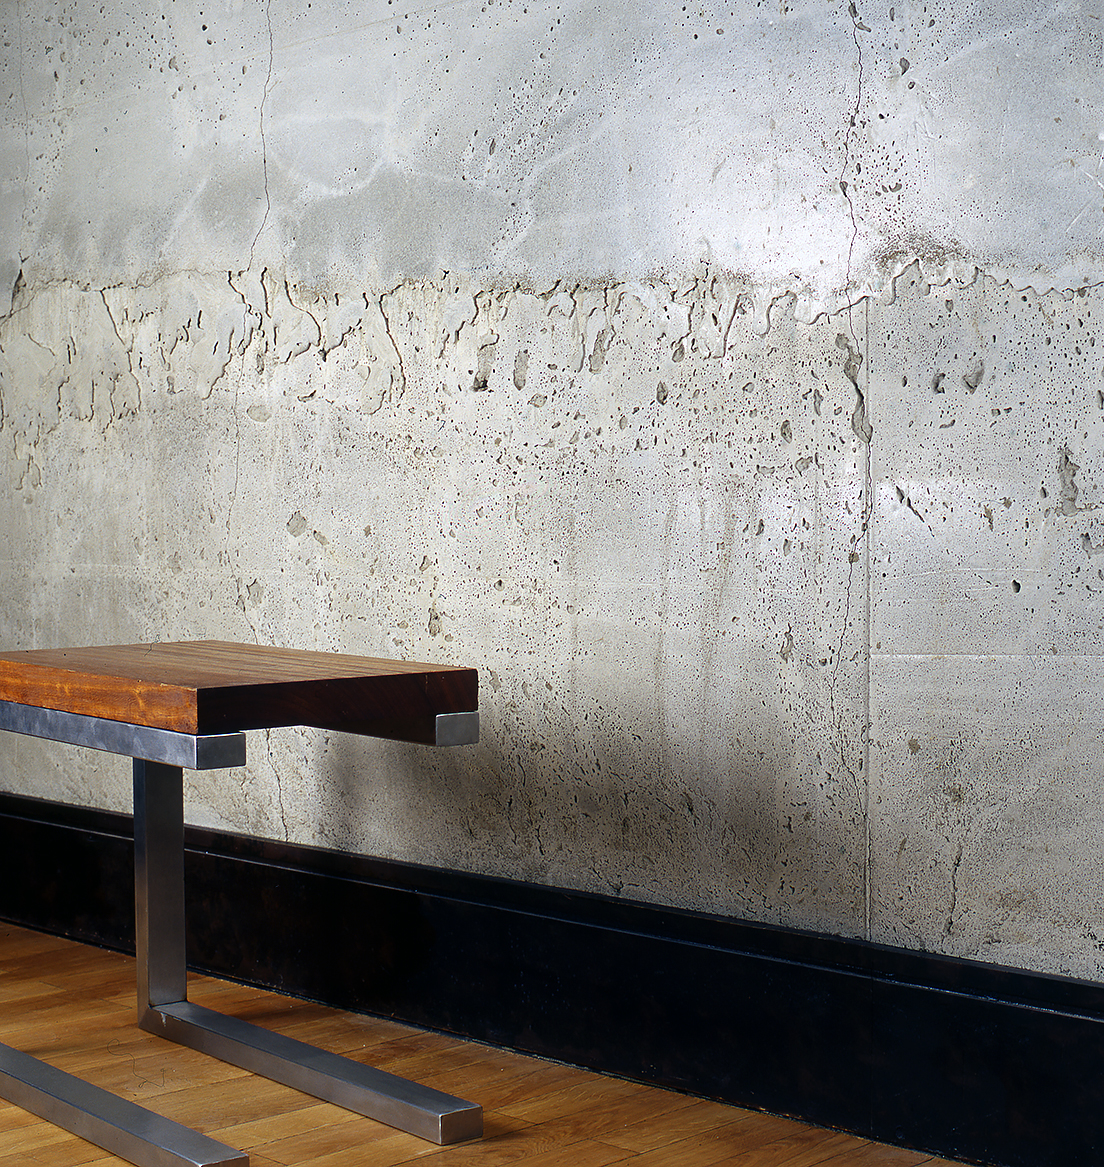 Chair: Eroko and Stainless Steel: Polished Concrete Wall